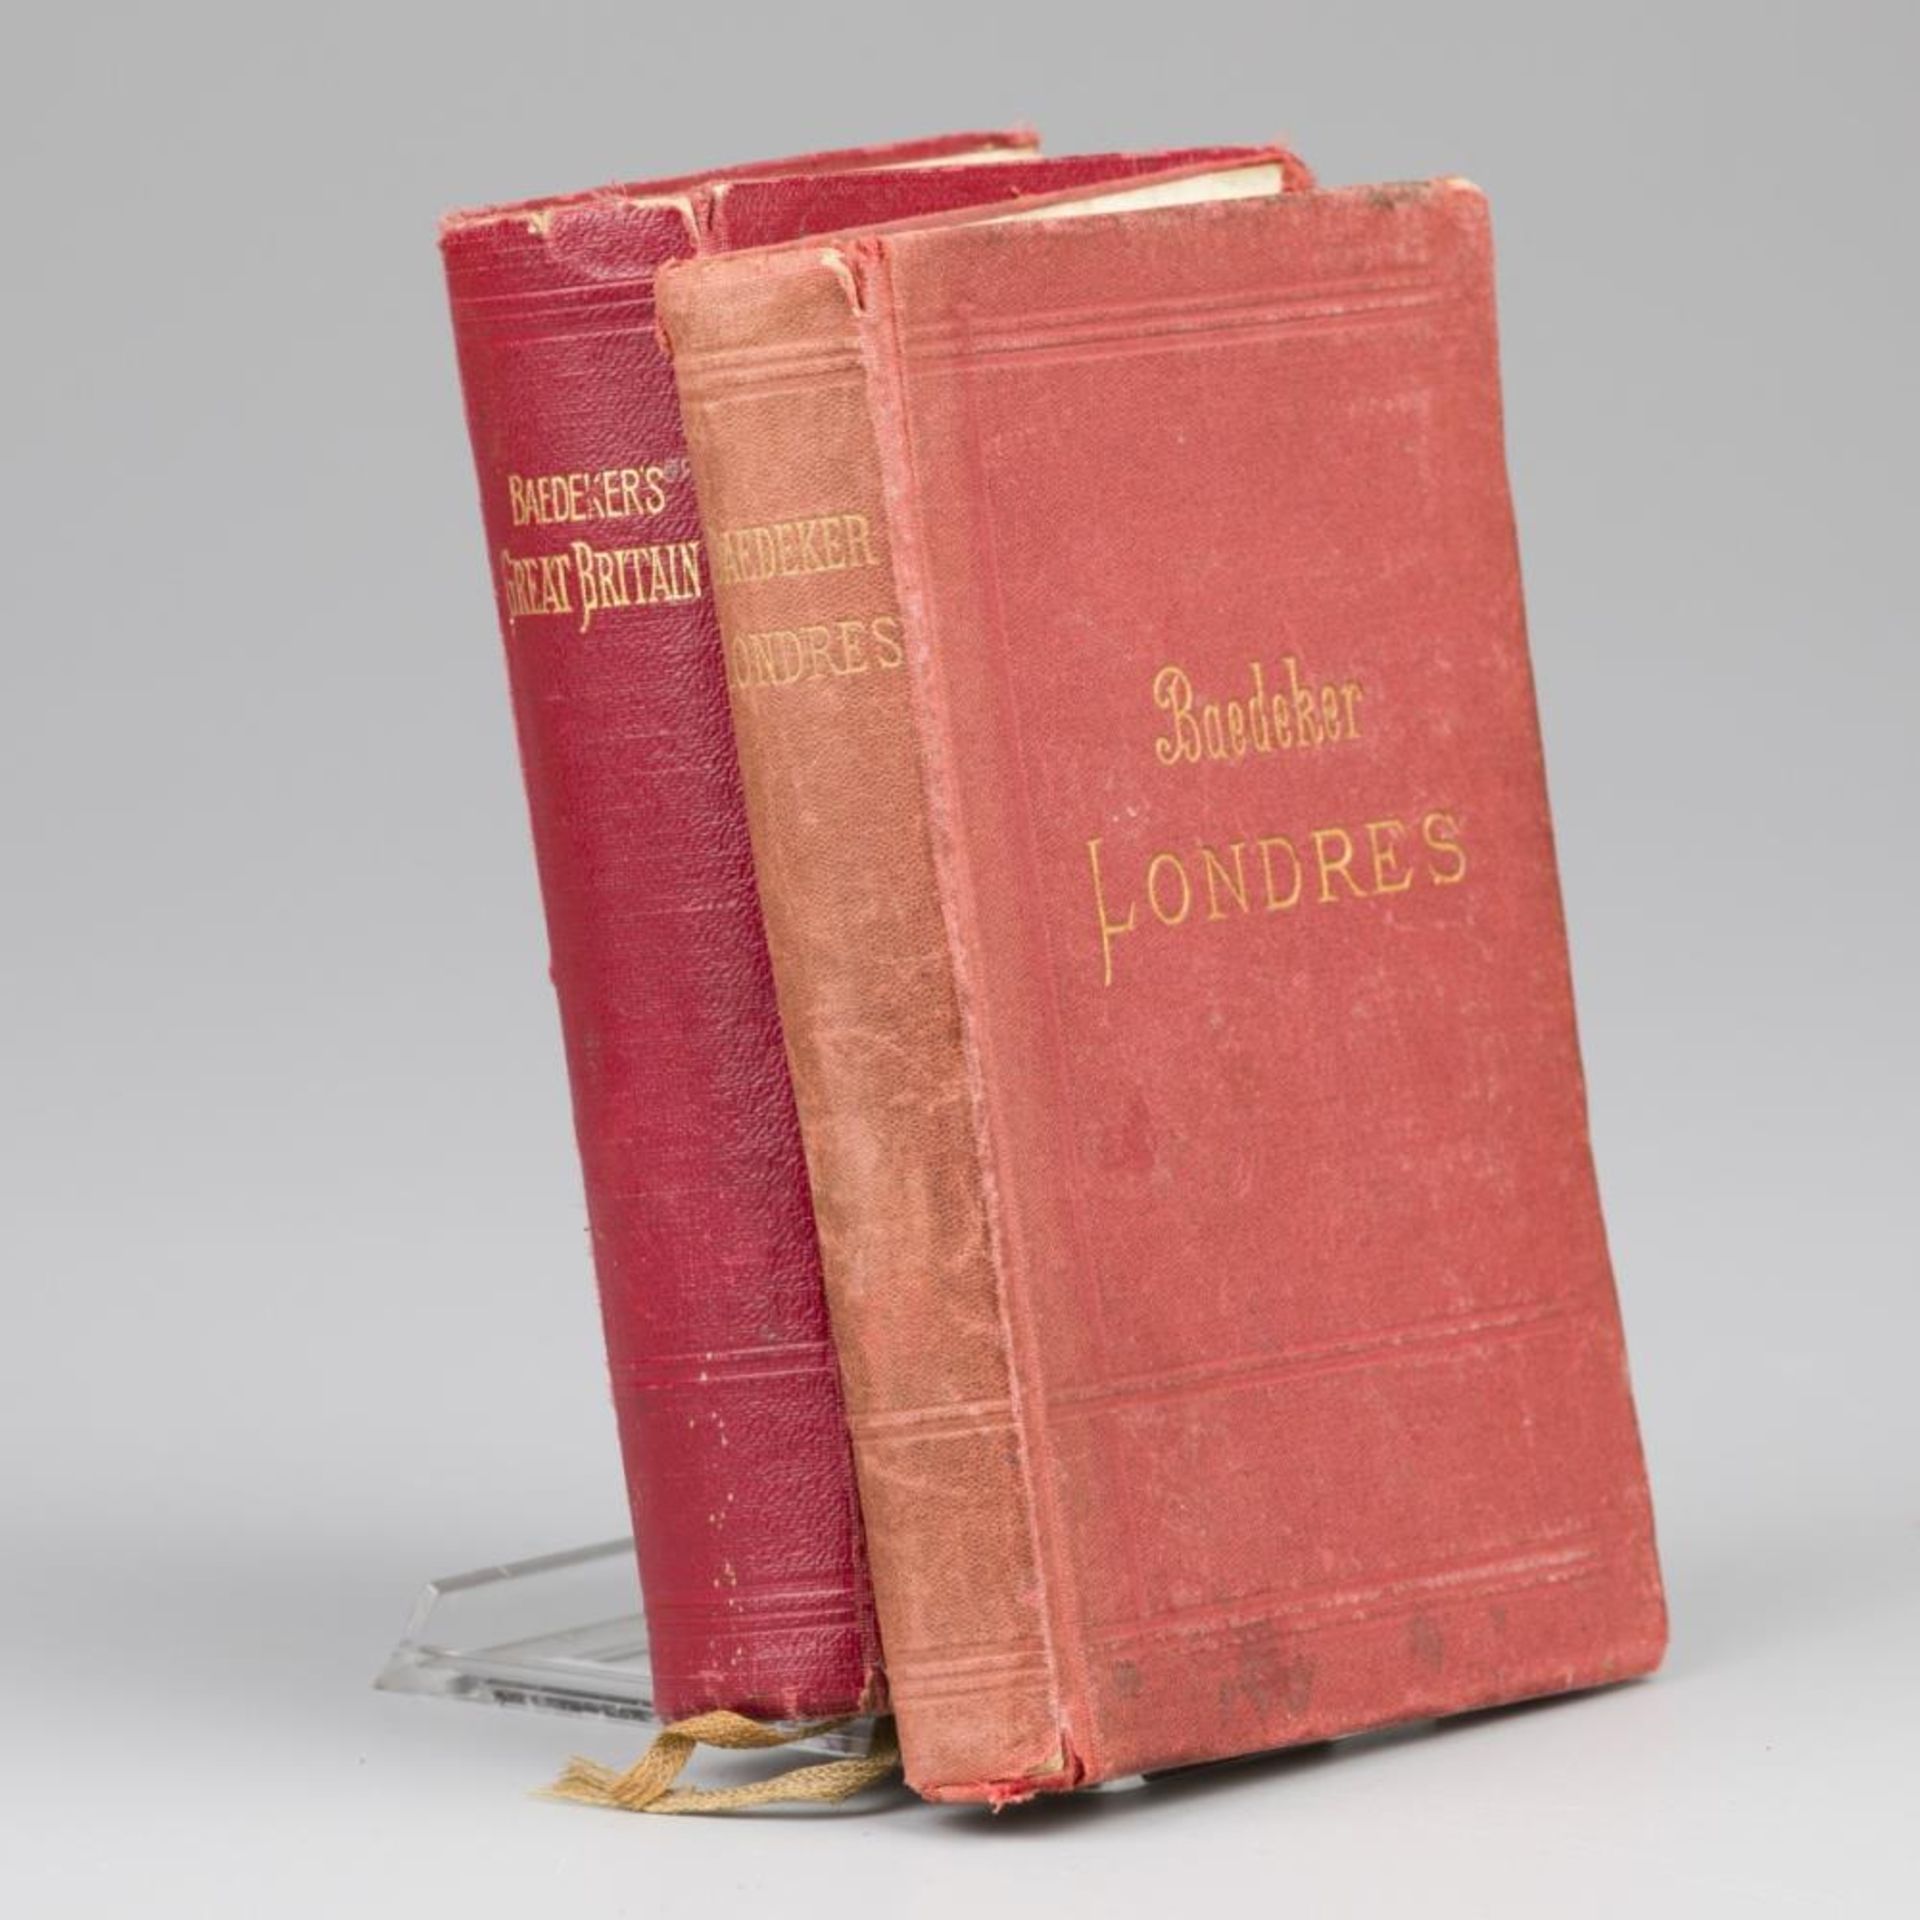 Two travel guides by Baedeker for various regions: Great Brittain, Londres. - Image 2 of 4